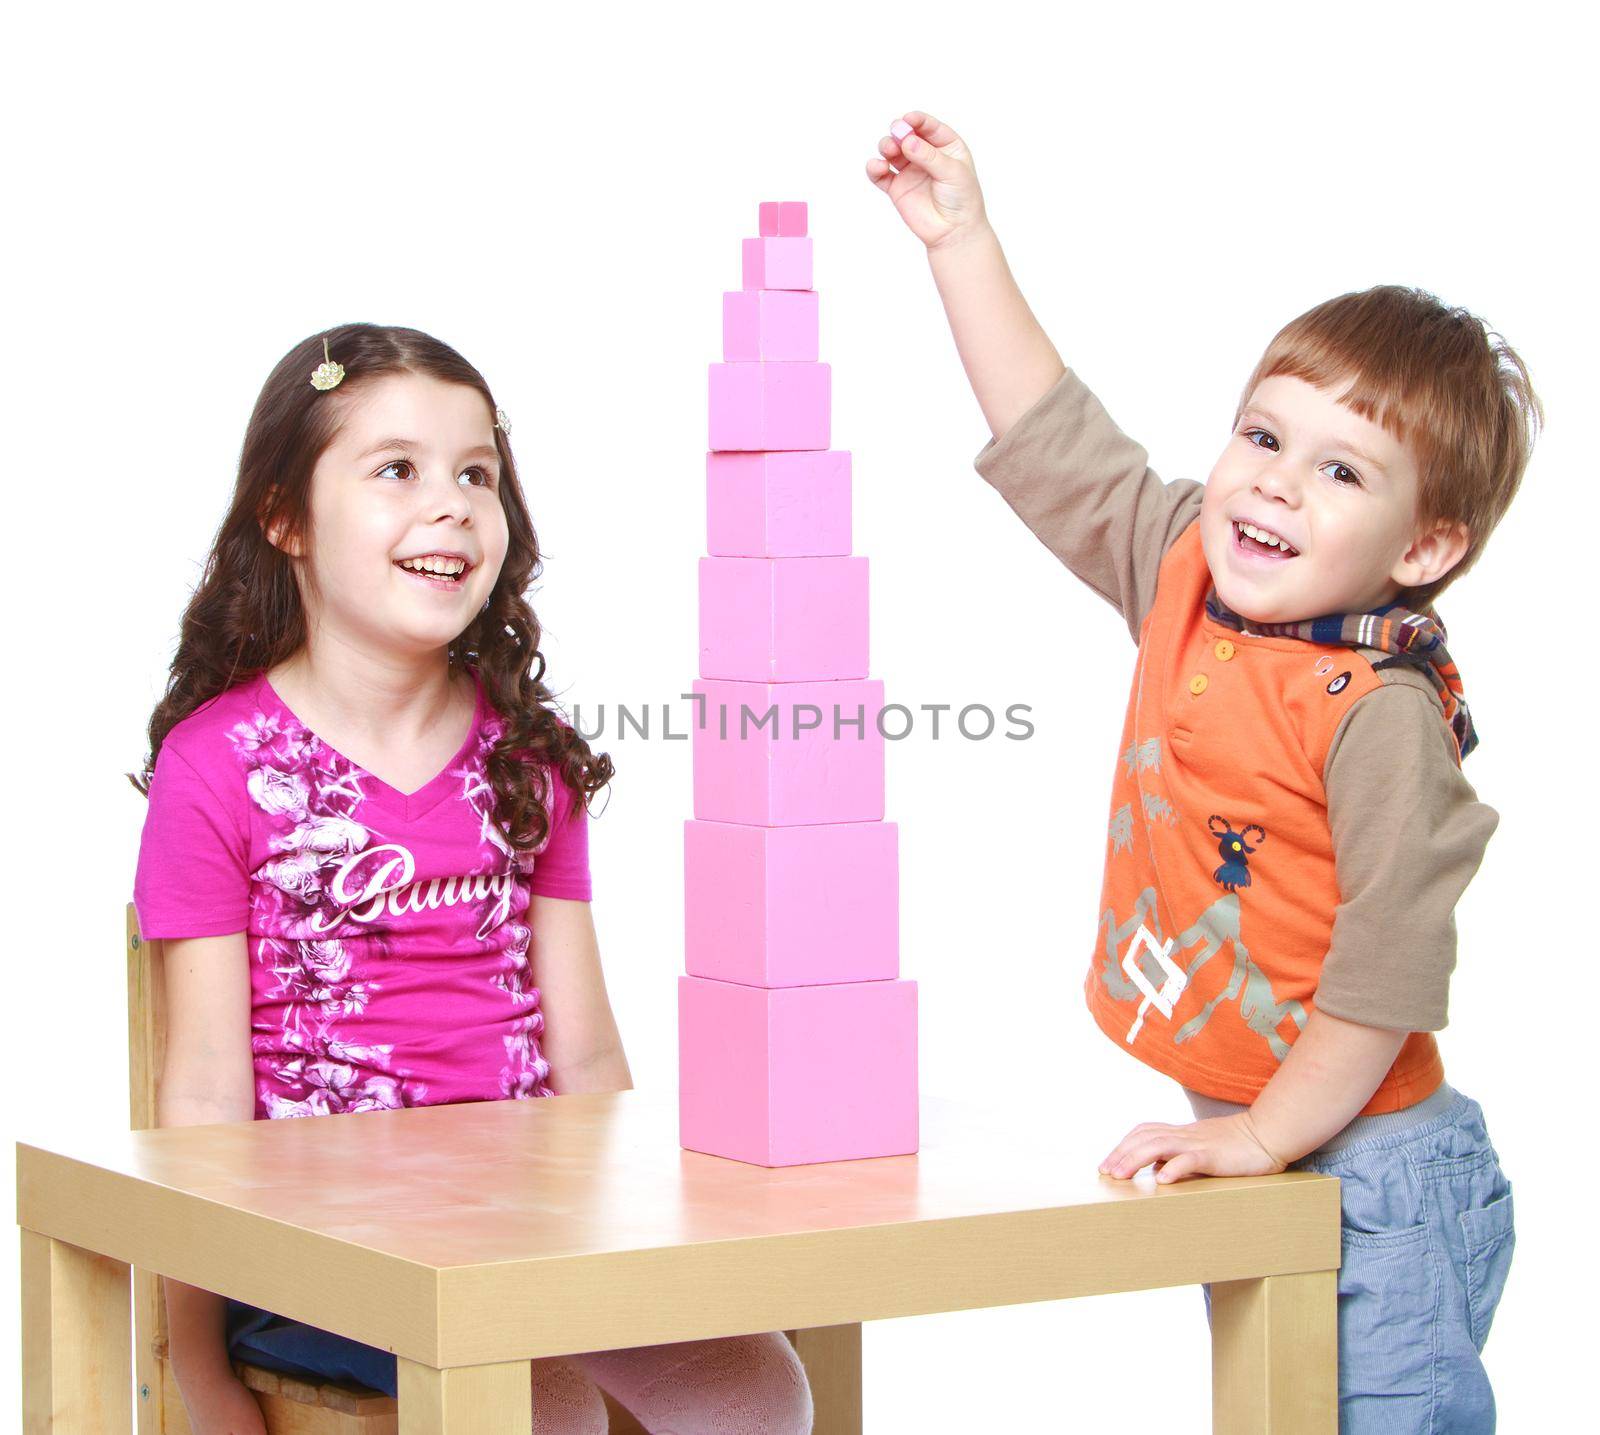 Smiling brother and sister playing together building pink tower, which stands on the table.Isolated on white background portrait.